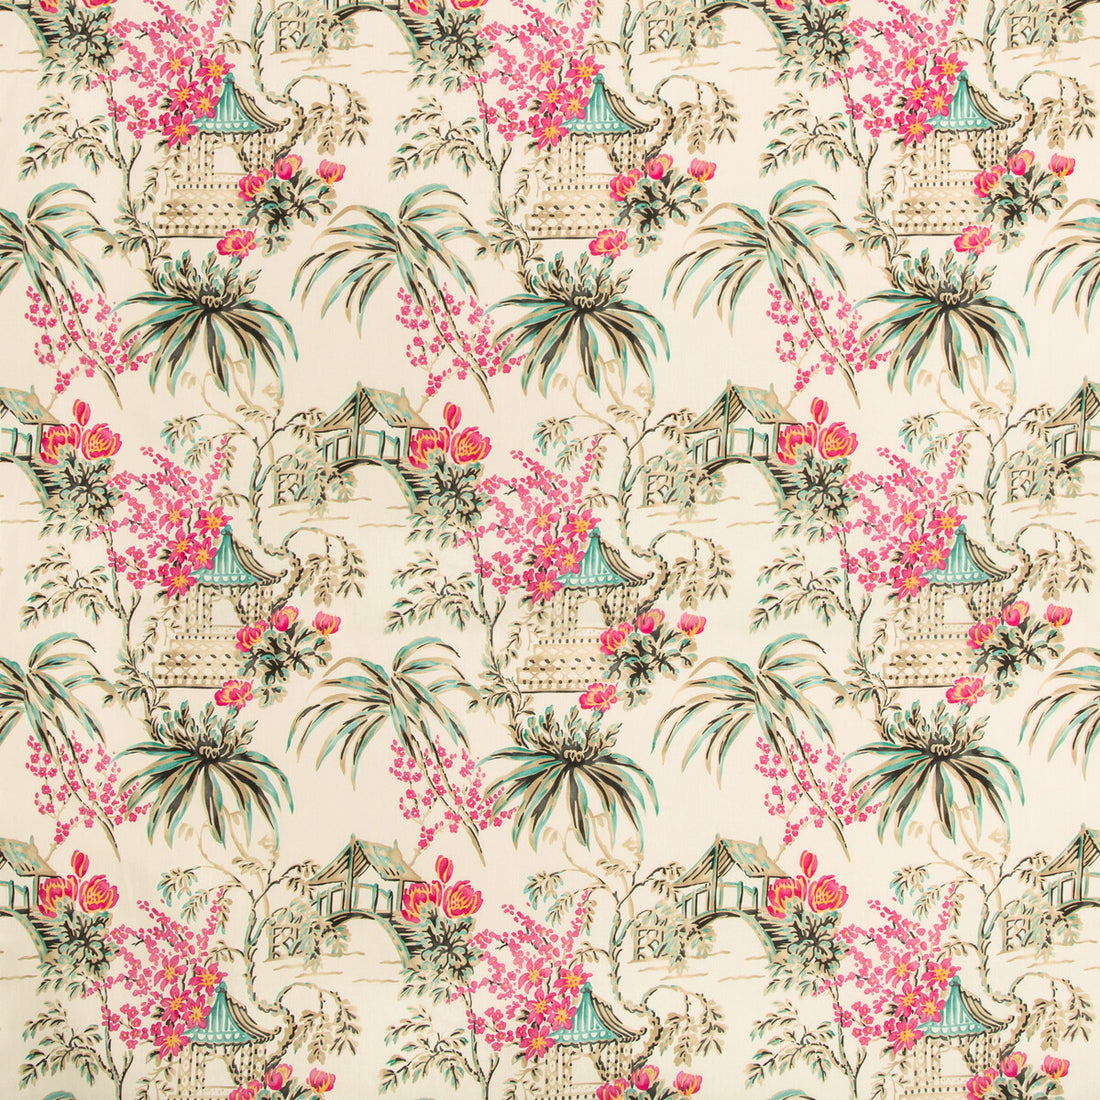 Tongli Print fabric in peony color - pattern 8019138.713.0 - by Brunschwig &amp; Fils in the Summer Palace collection